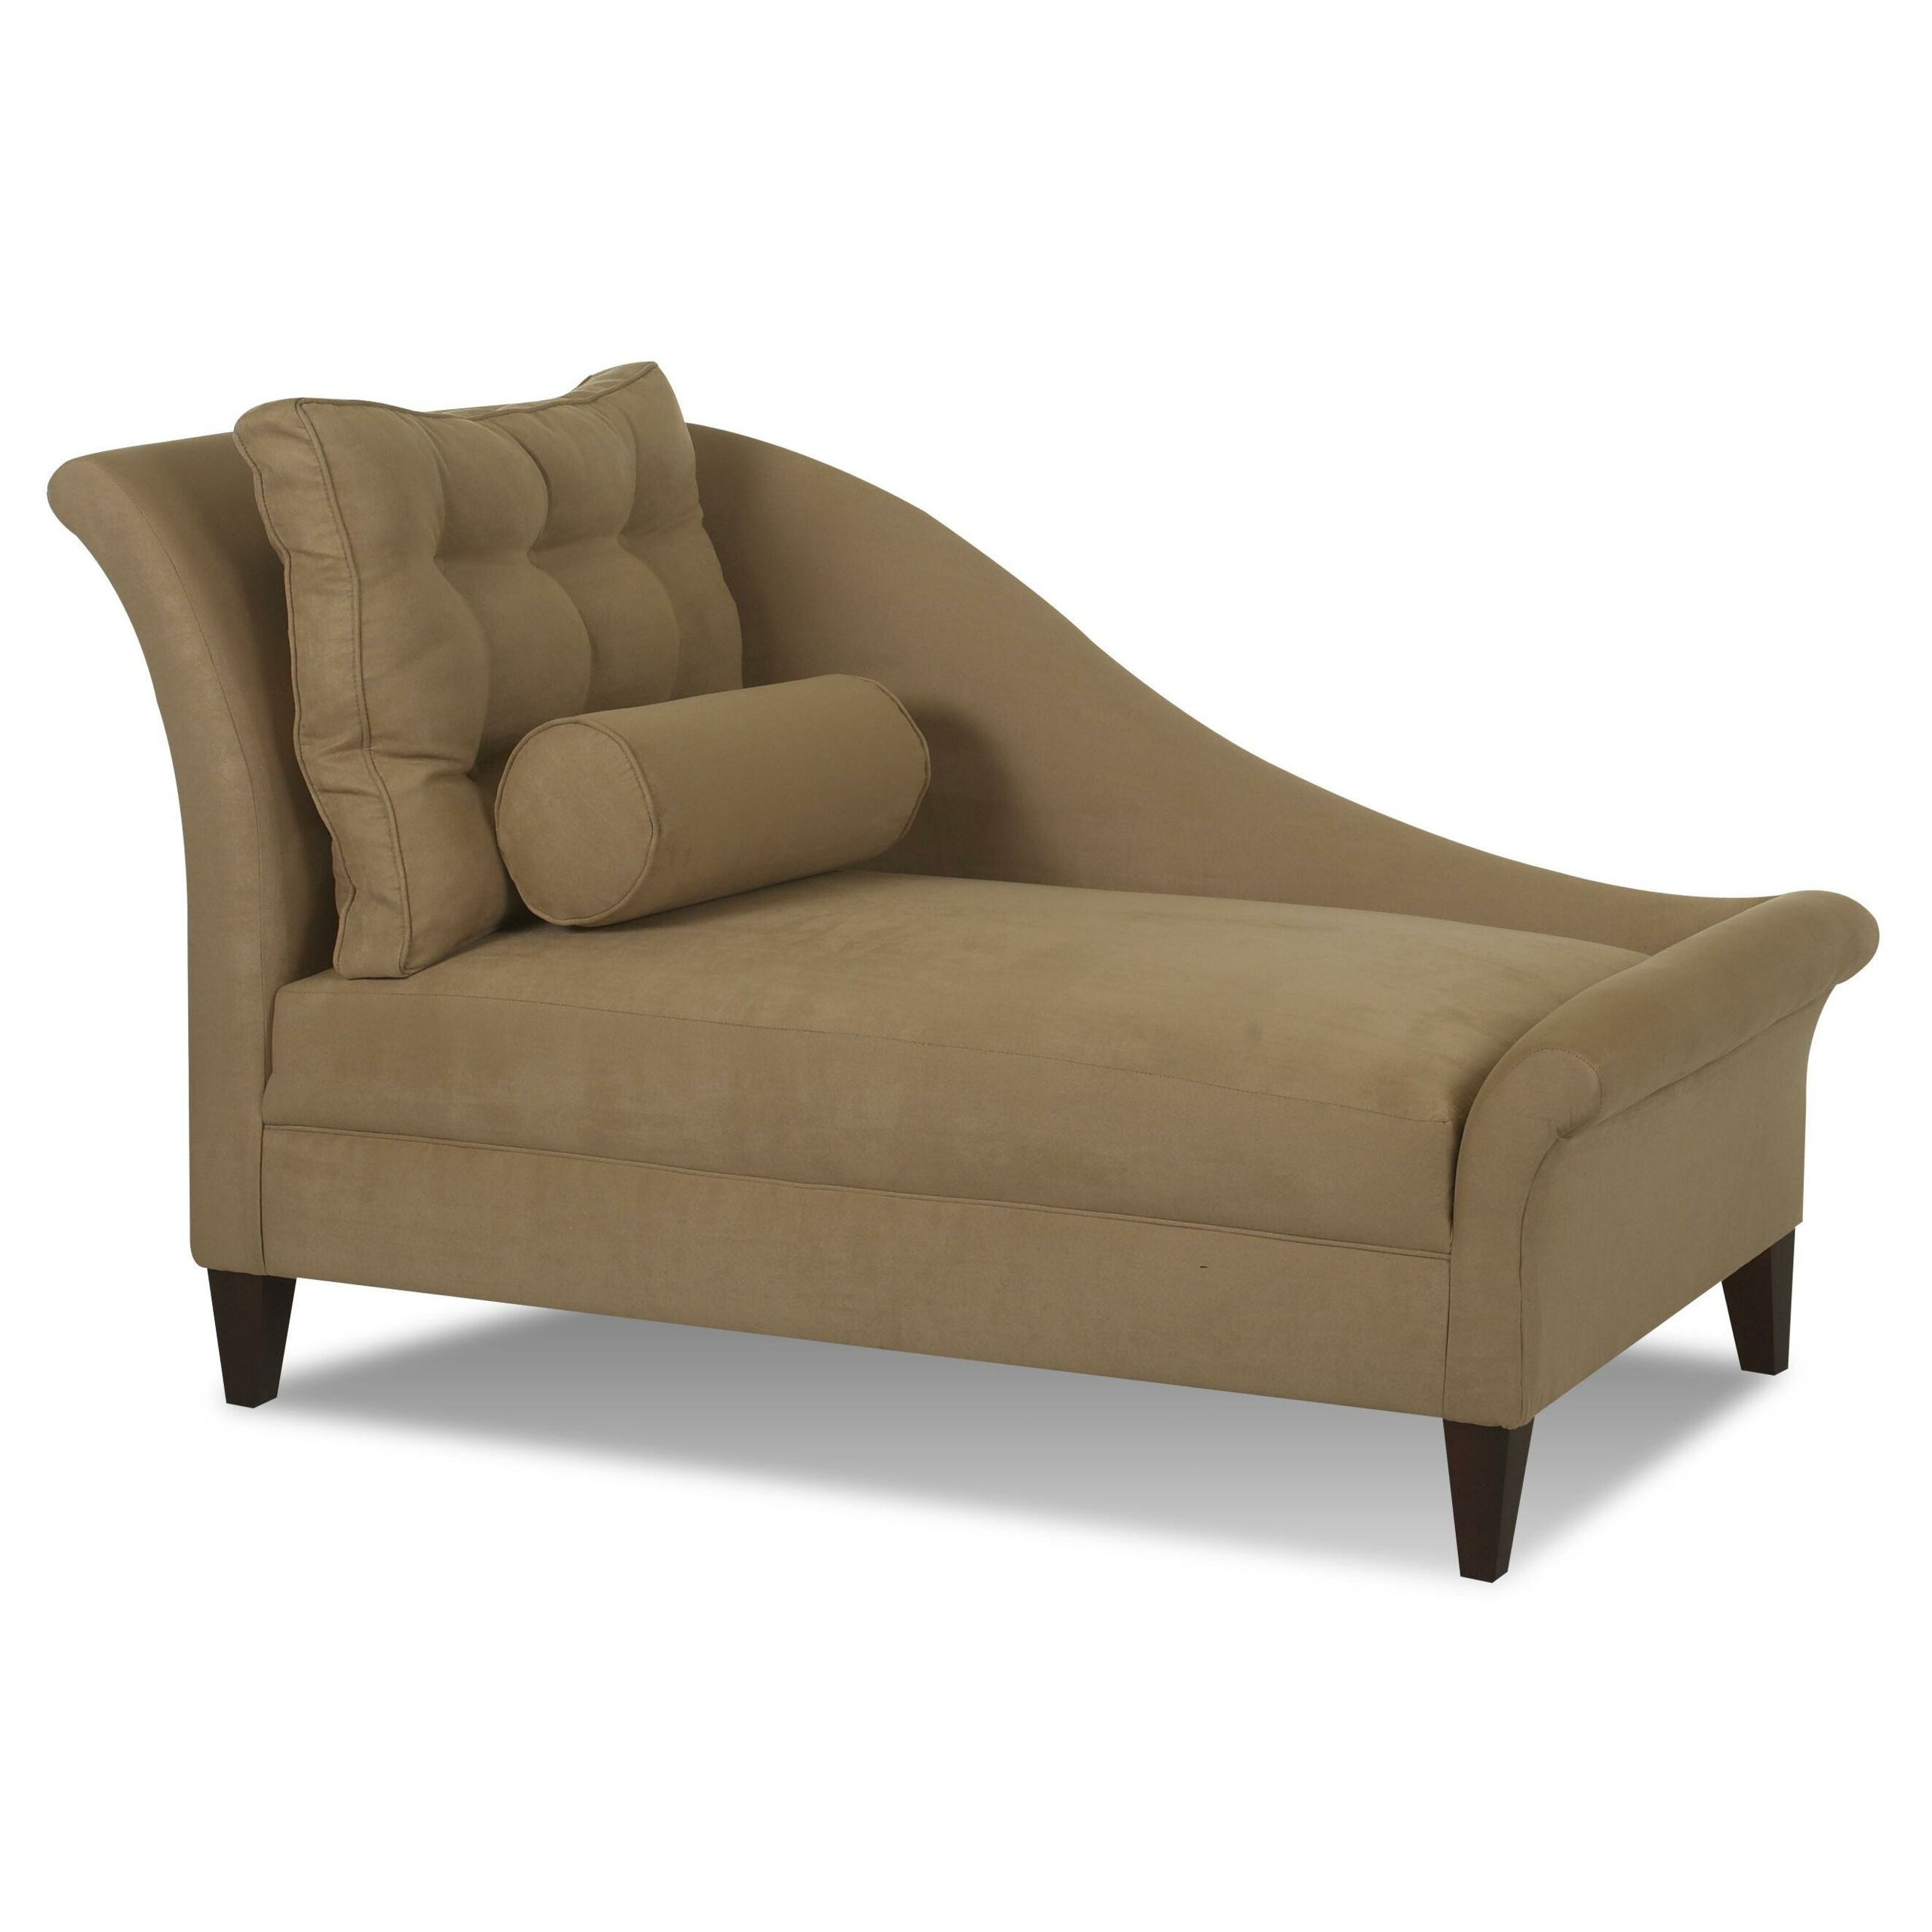 Chaise lounge chairs chaise chaise lounge indoor lounge indoor